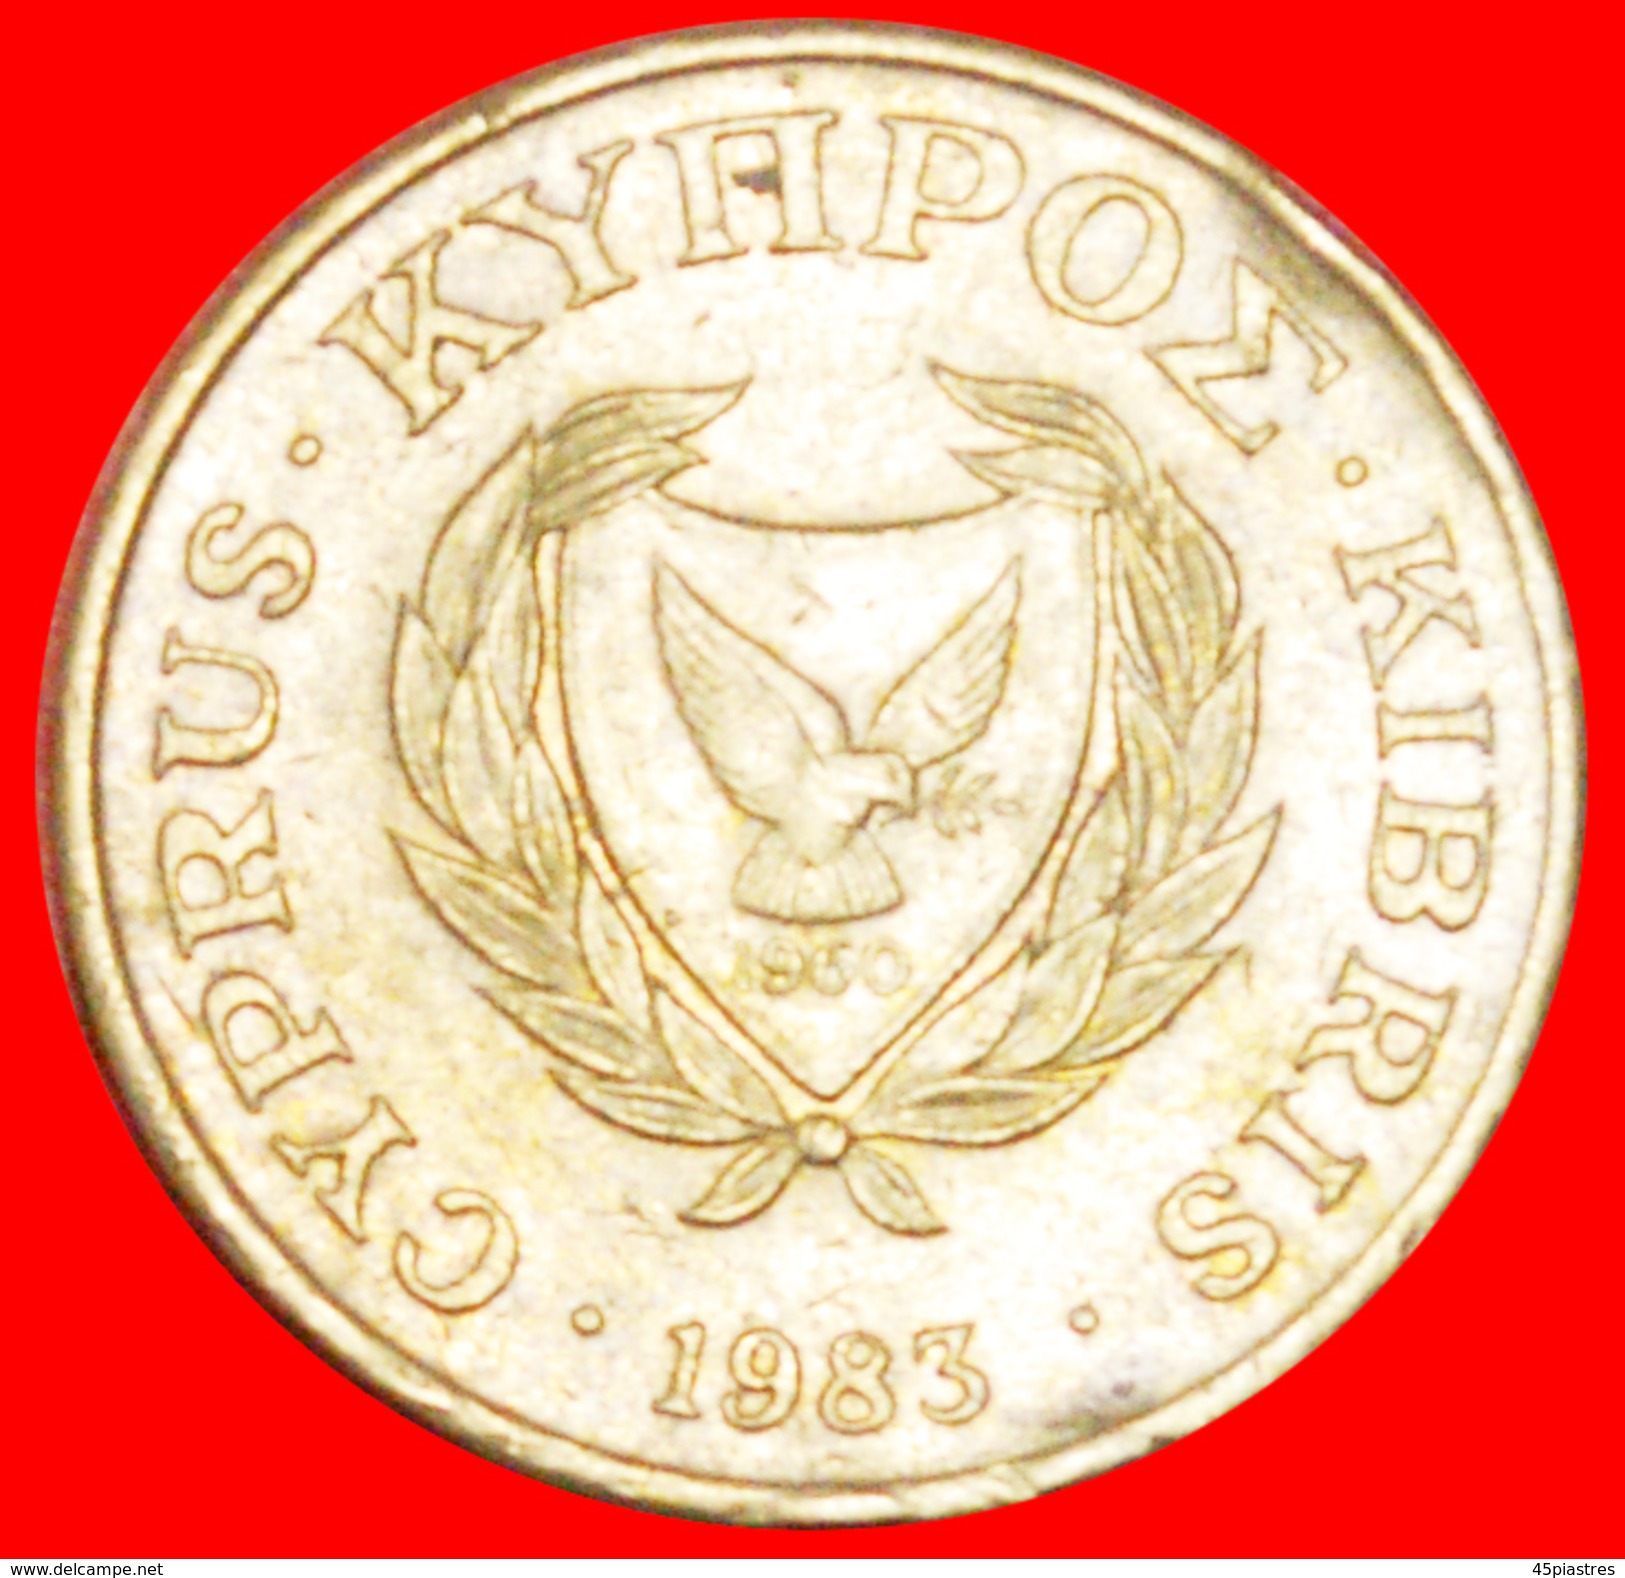 § GOATS: CYPRUS &#x2605; 2 CENTS 1983! LOW START&#x2605; NO RESERVE! - Chypre